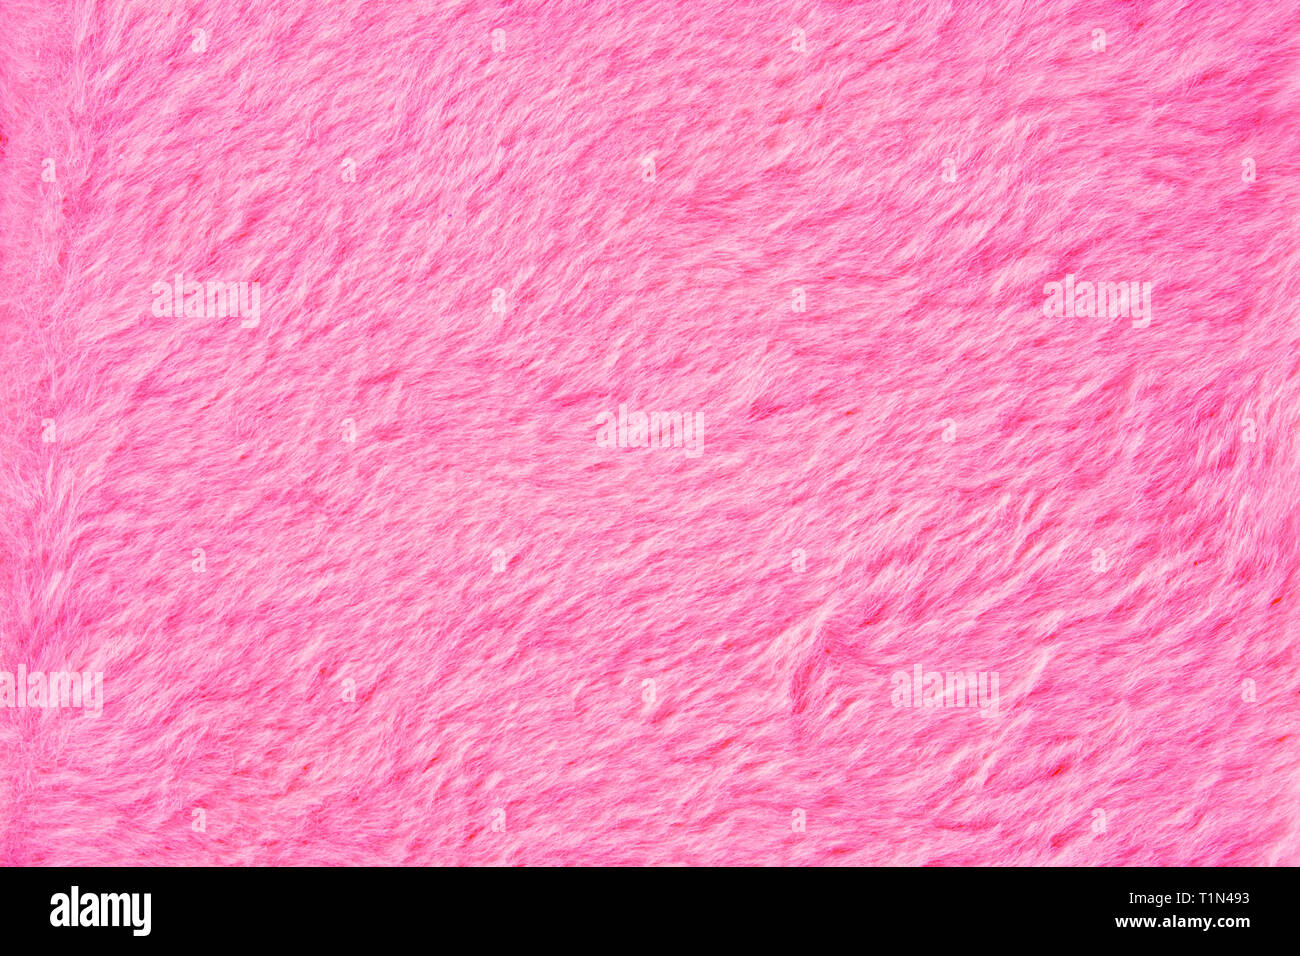 Pink fur texture close up. Pink fluffy fur background Stock Photo